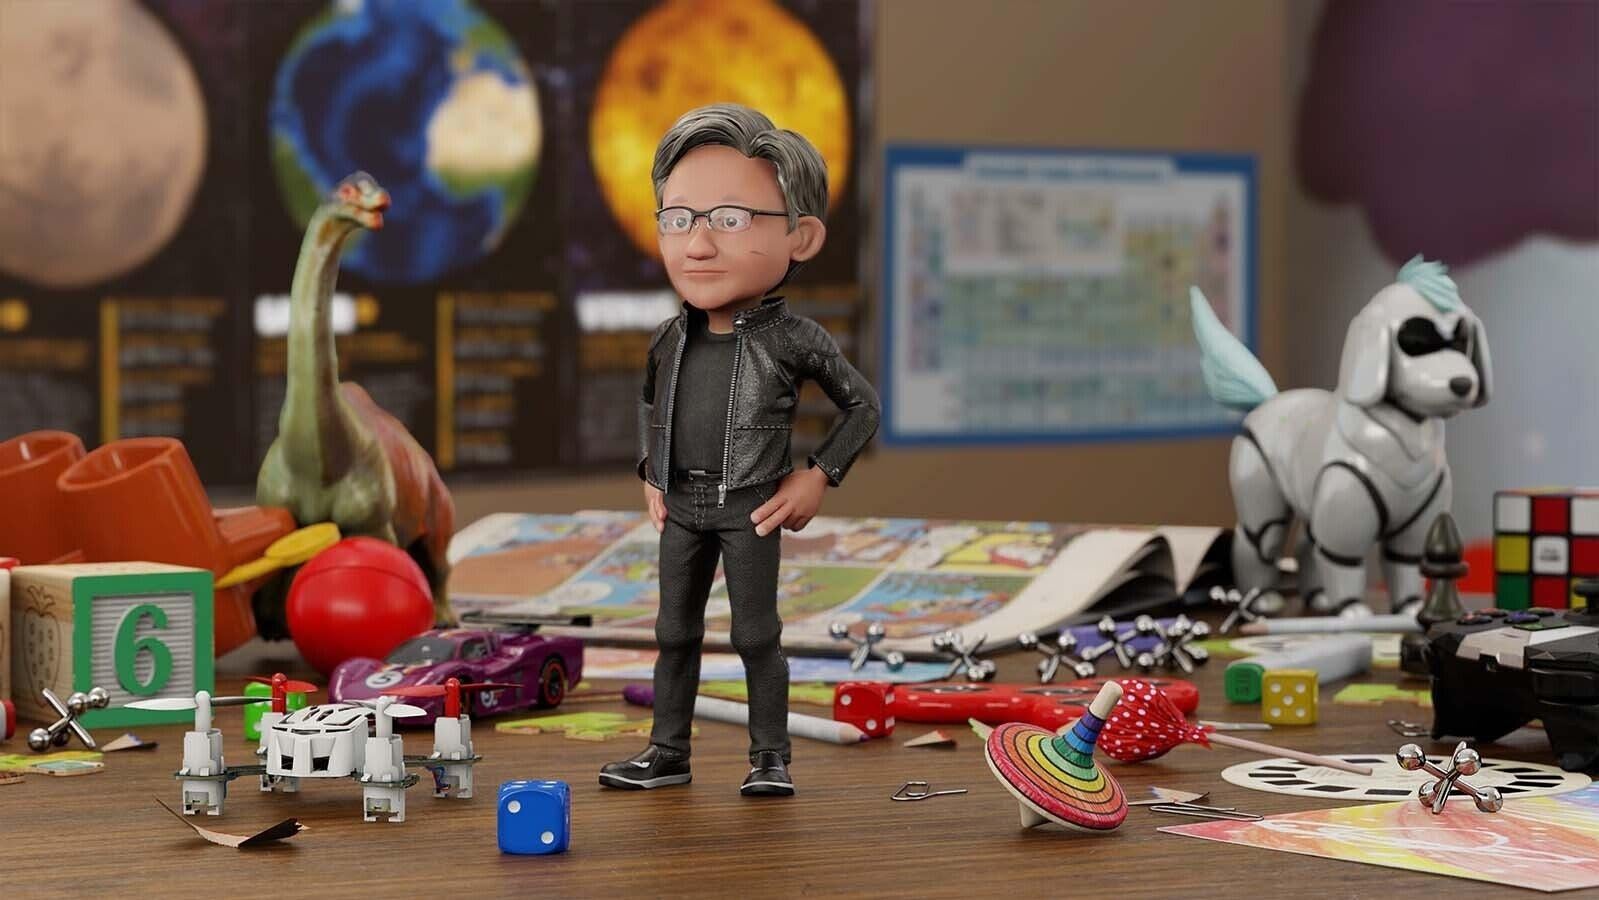 Nvidia founder Jensen Huang speaks to colleagues through an avatar version of himself.  (Image: Nvidia, Other)